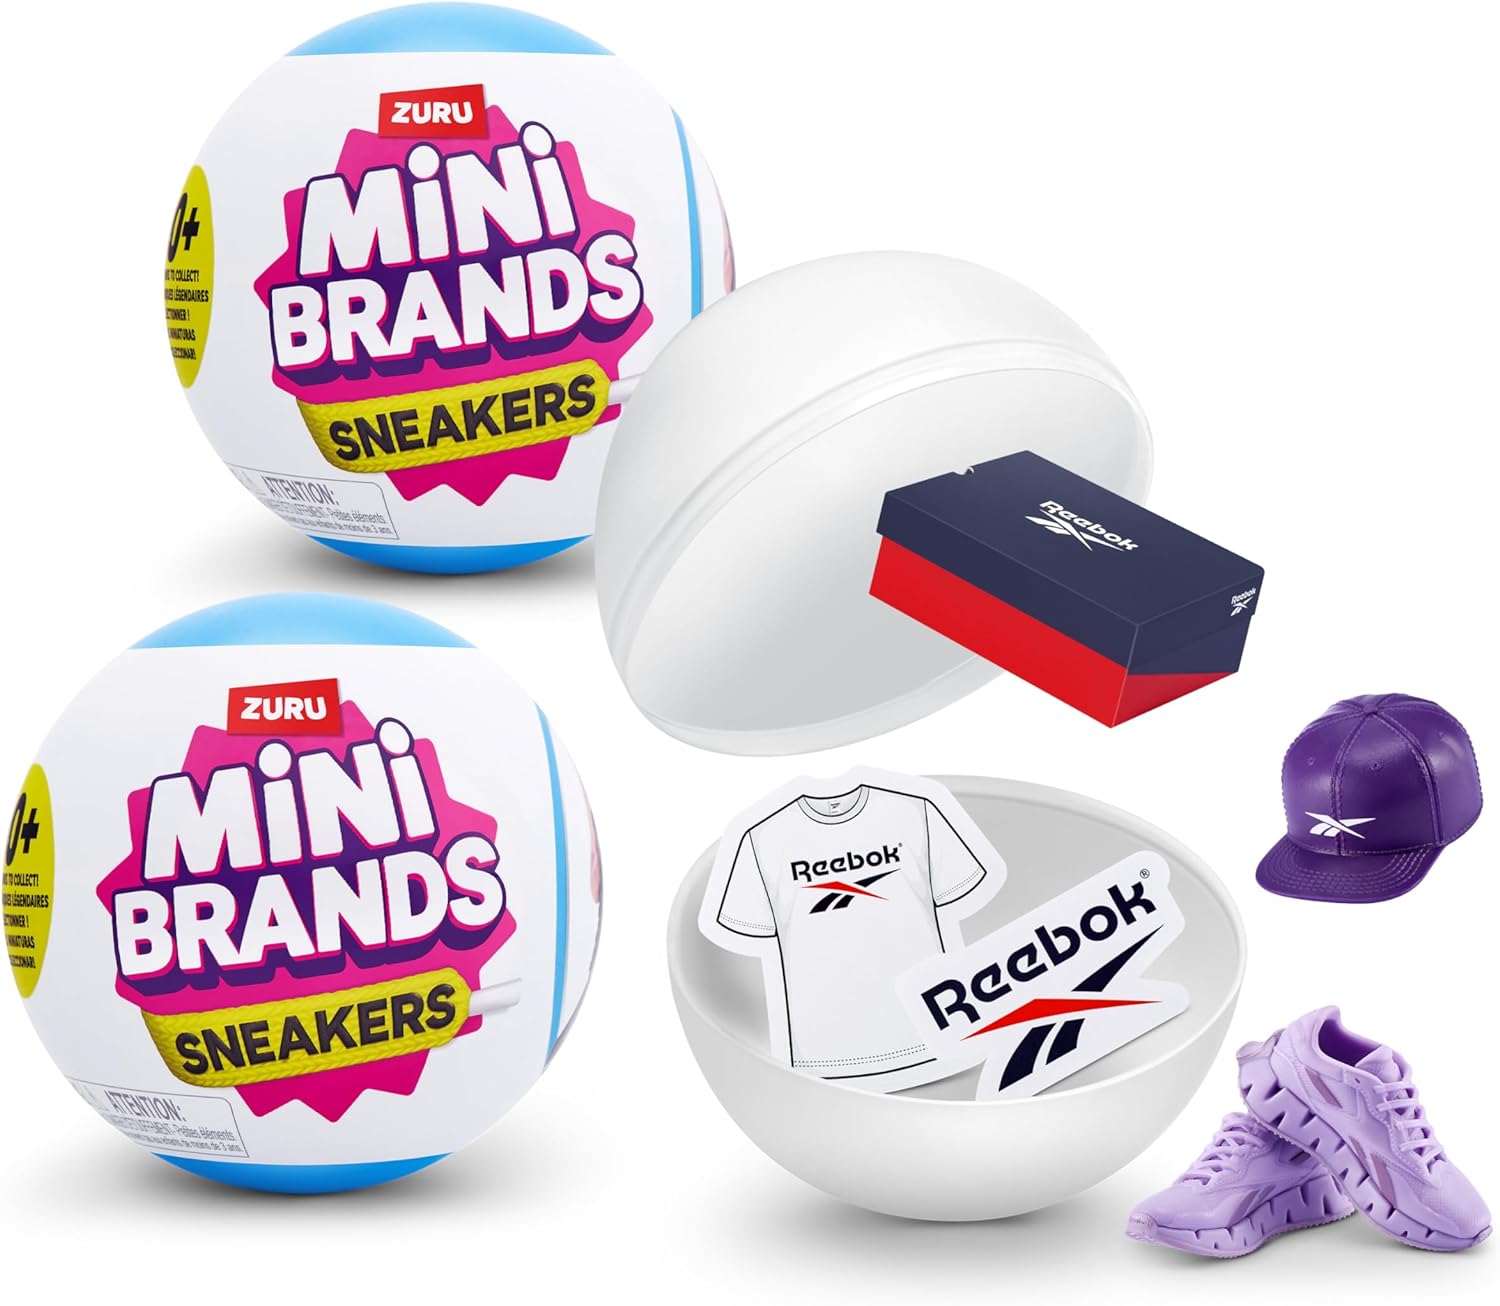 Mini Brands Sneakers Capsule by ZURU Real Miniature Sneaker Brands Collectible Toy, Capsules of 5 Mystery Miniature Brands for Girls, Teens, Adults and Collectors